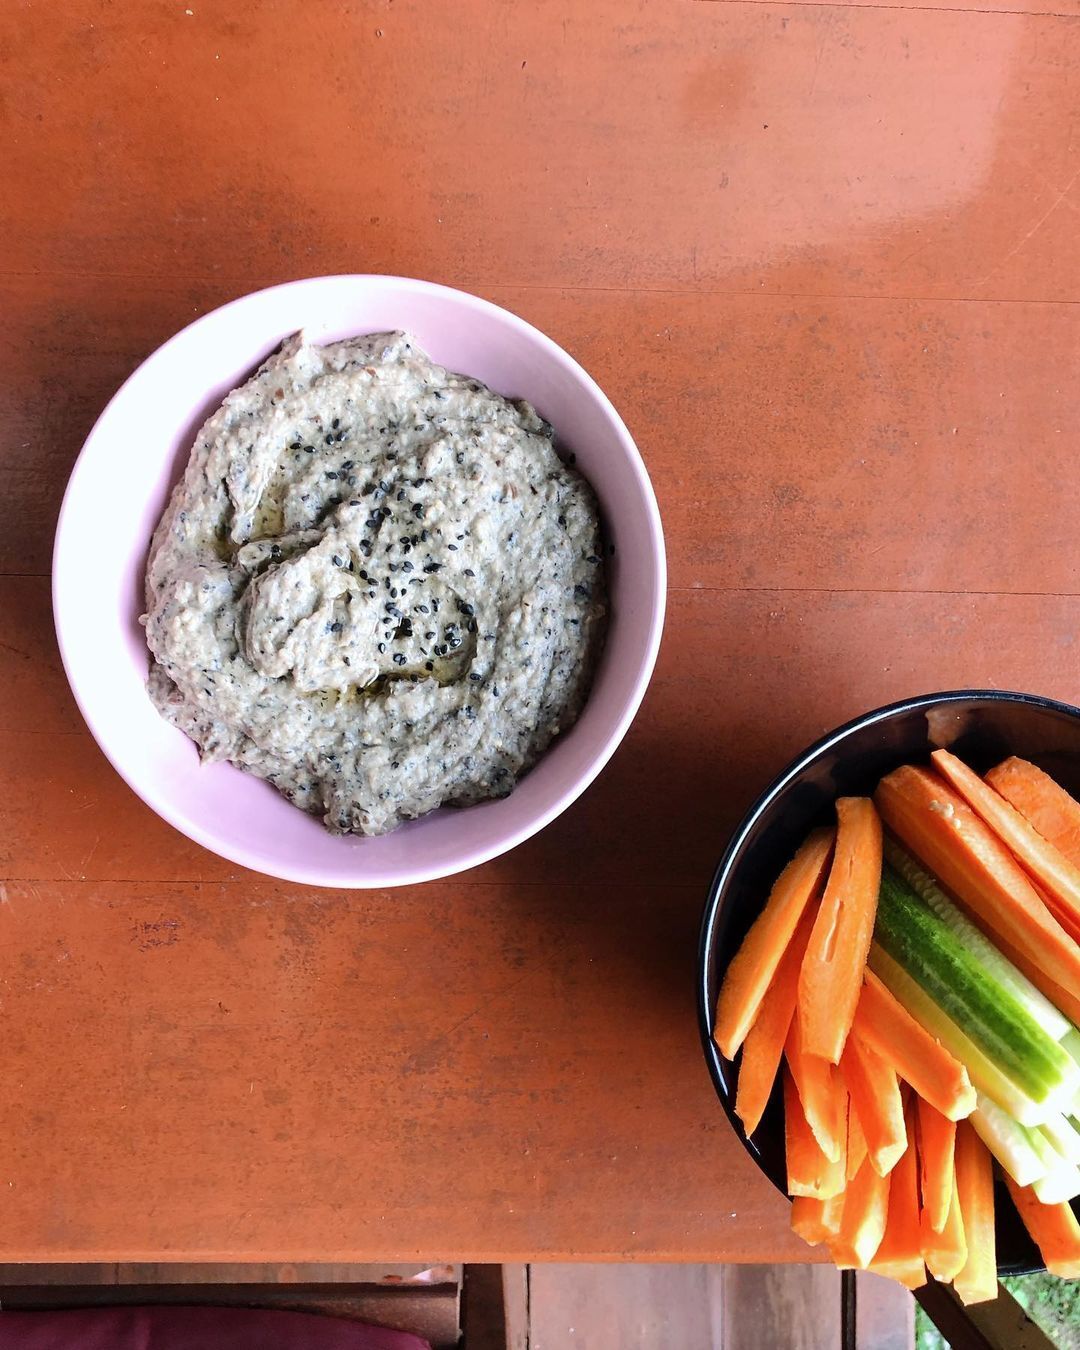 Hummus with vegetables